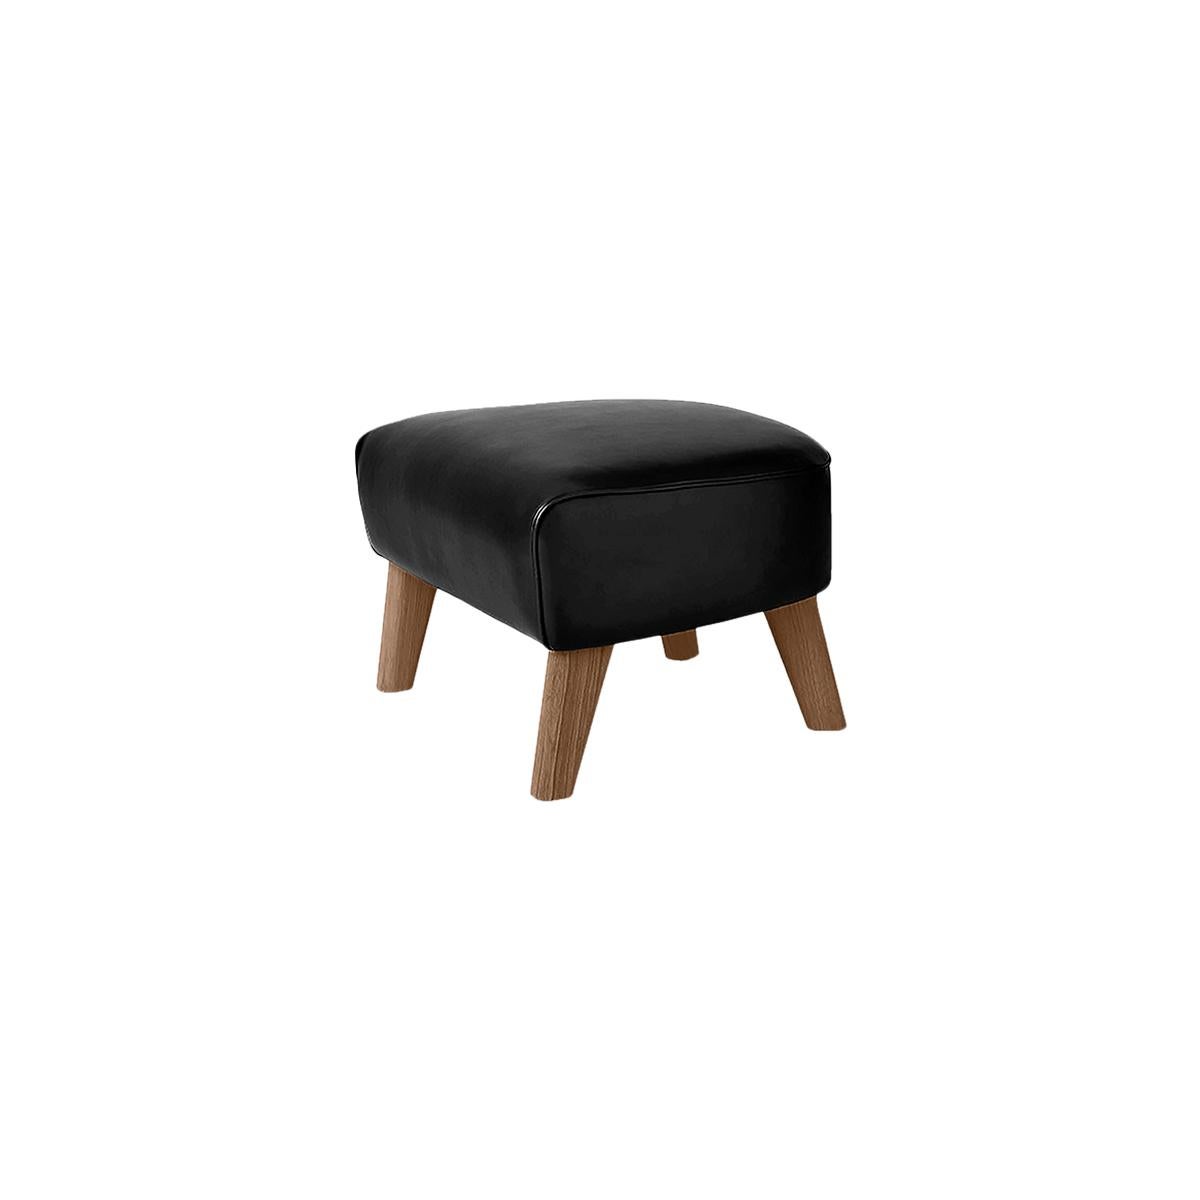 Modern Set Of 4 Black Leather and Smoked Oak My Own Chair Footstools by Lassen